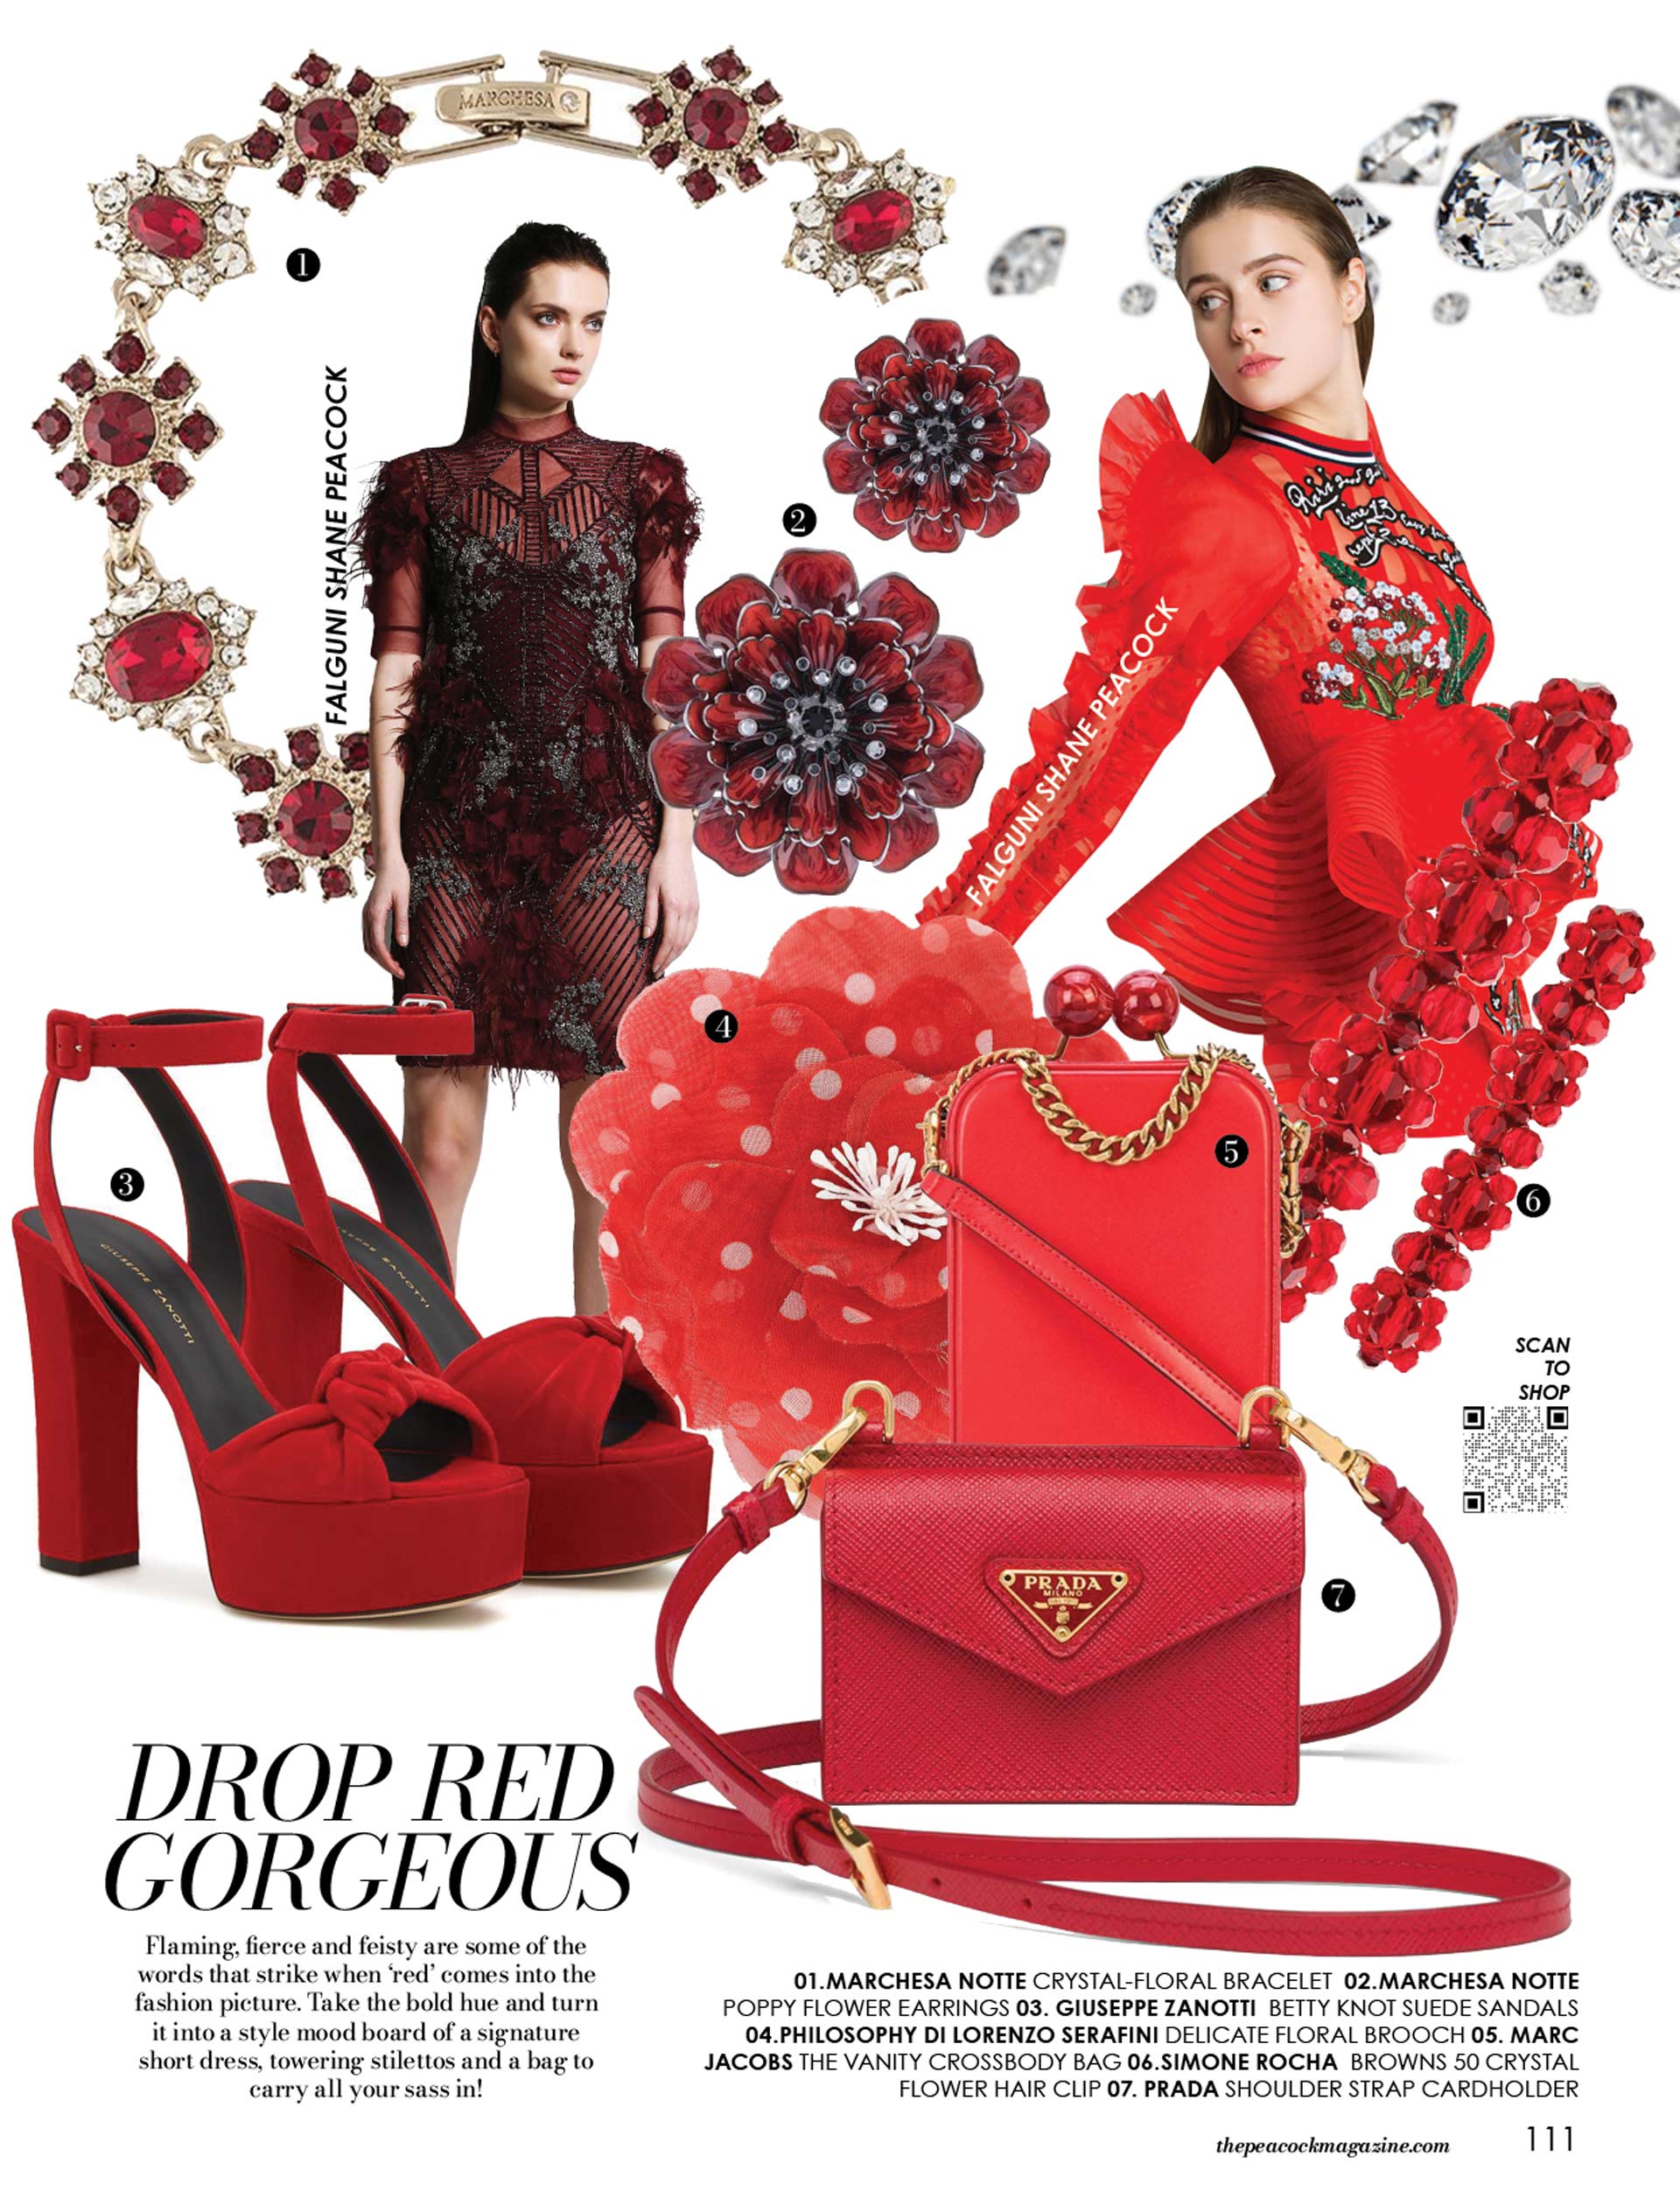 DROP RED GORGEOUS